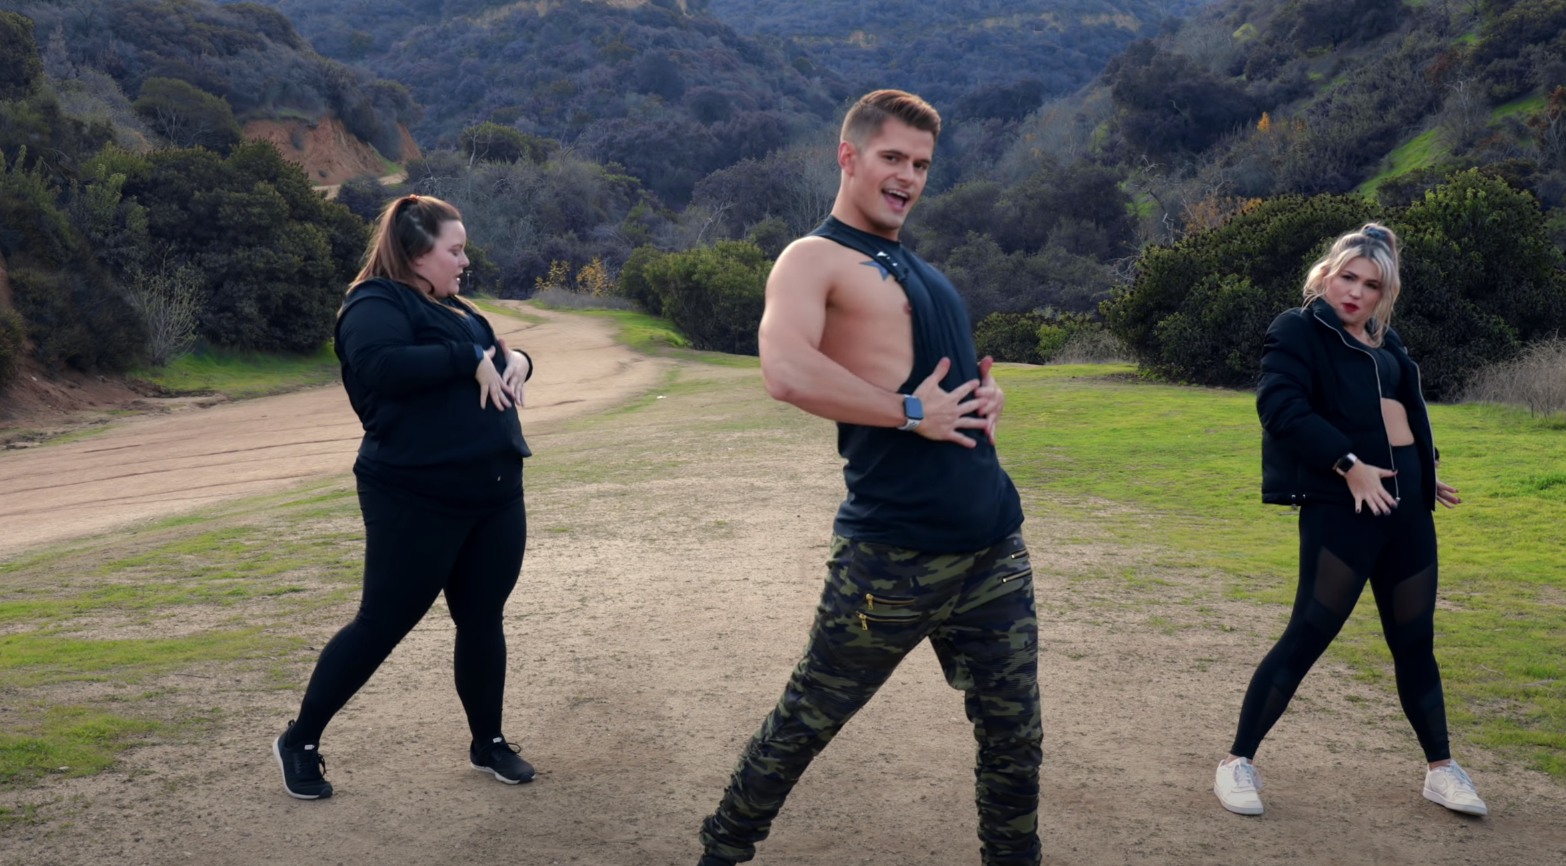 YouTuber The Fitness Marshall doing a dance workout with two people